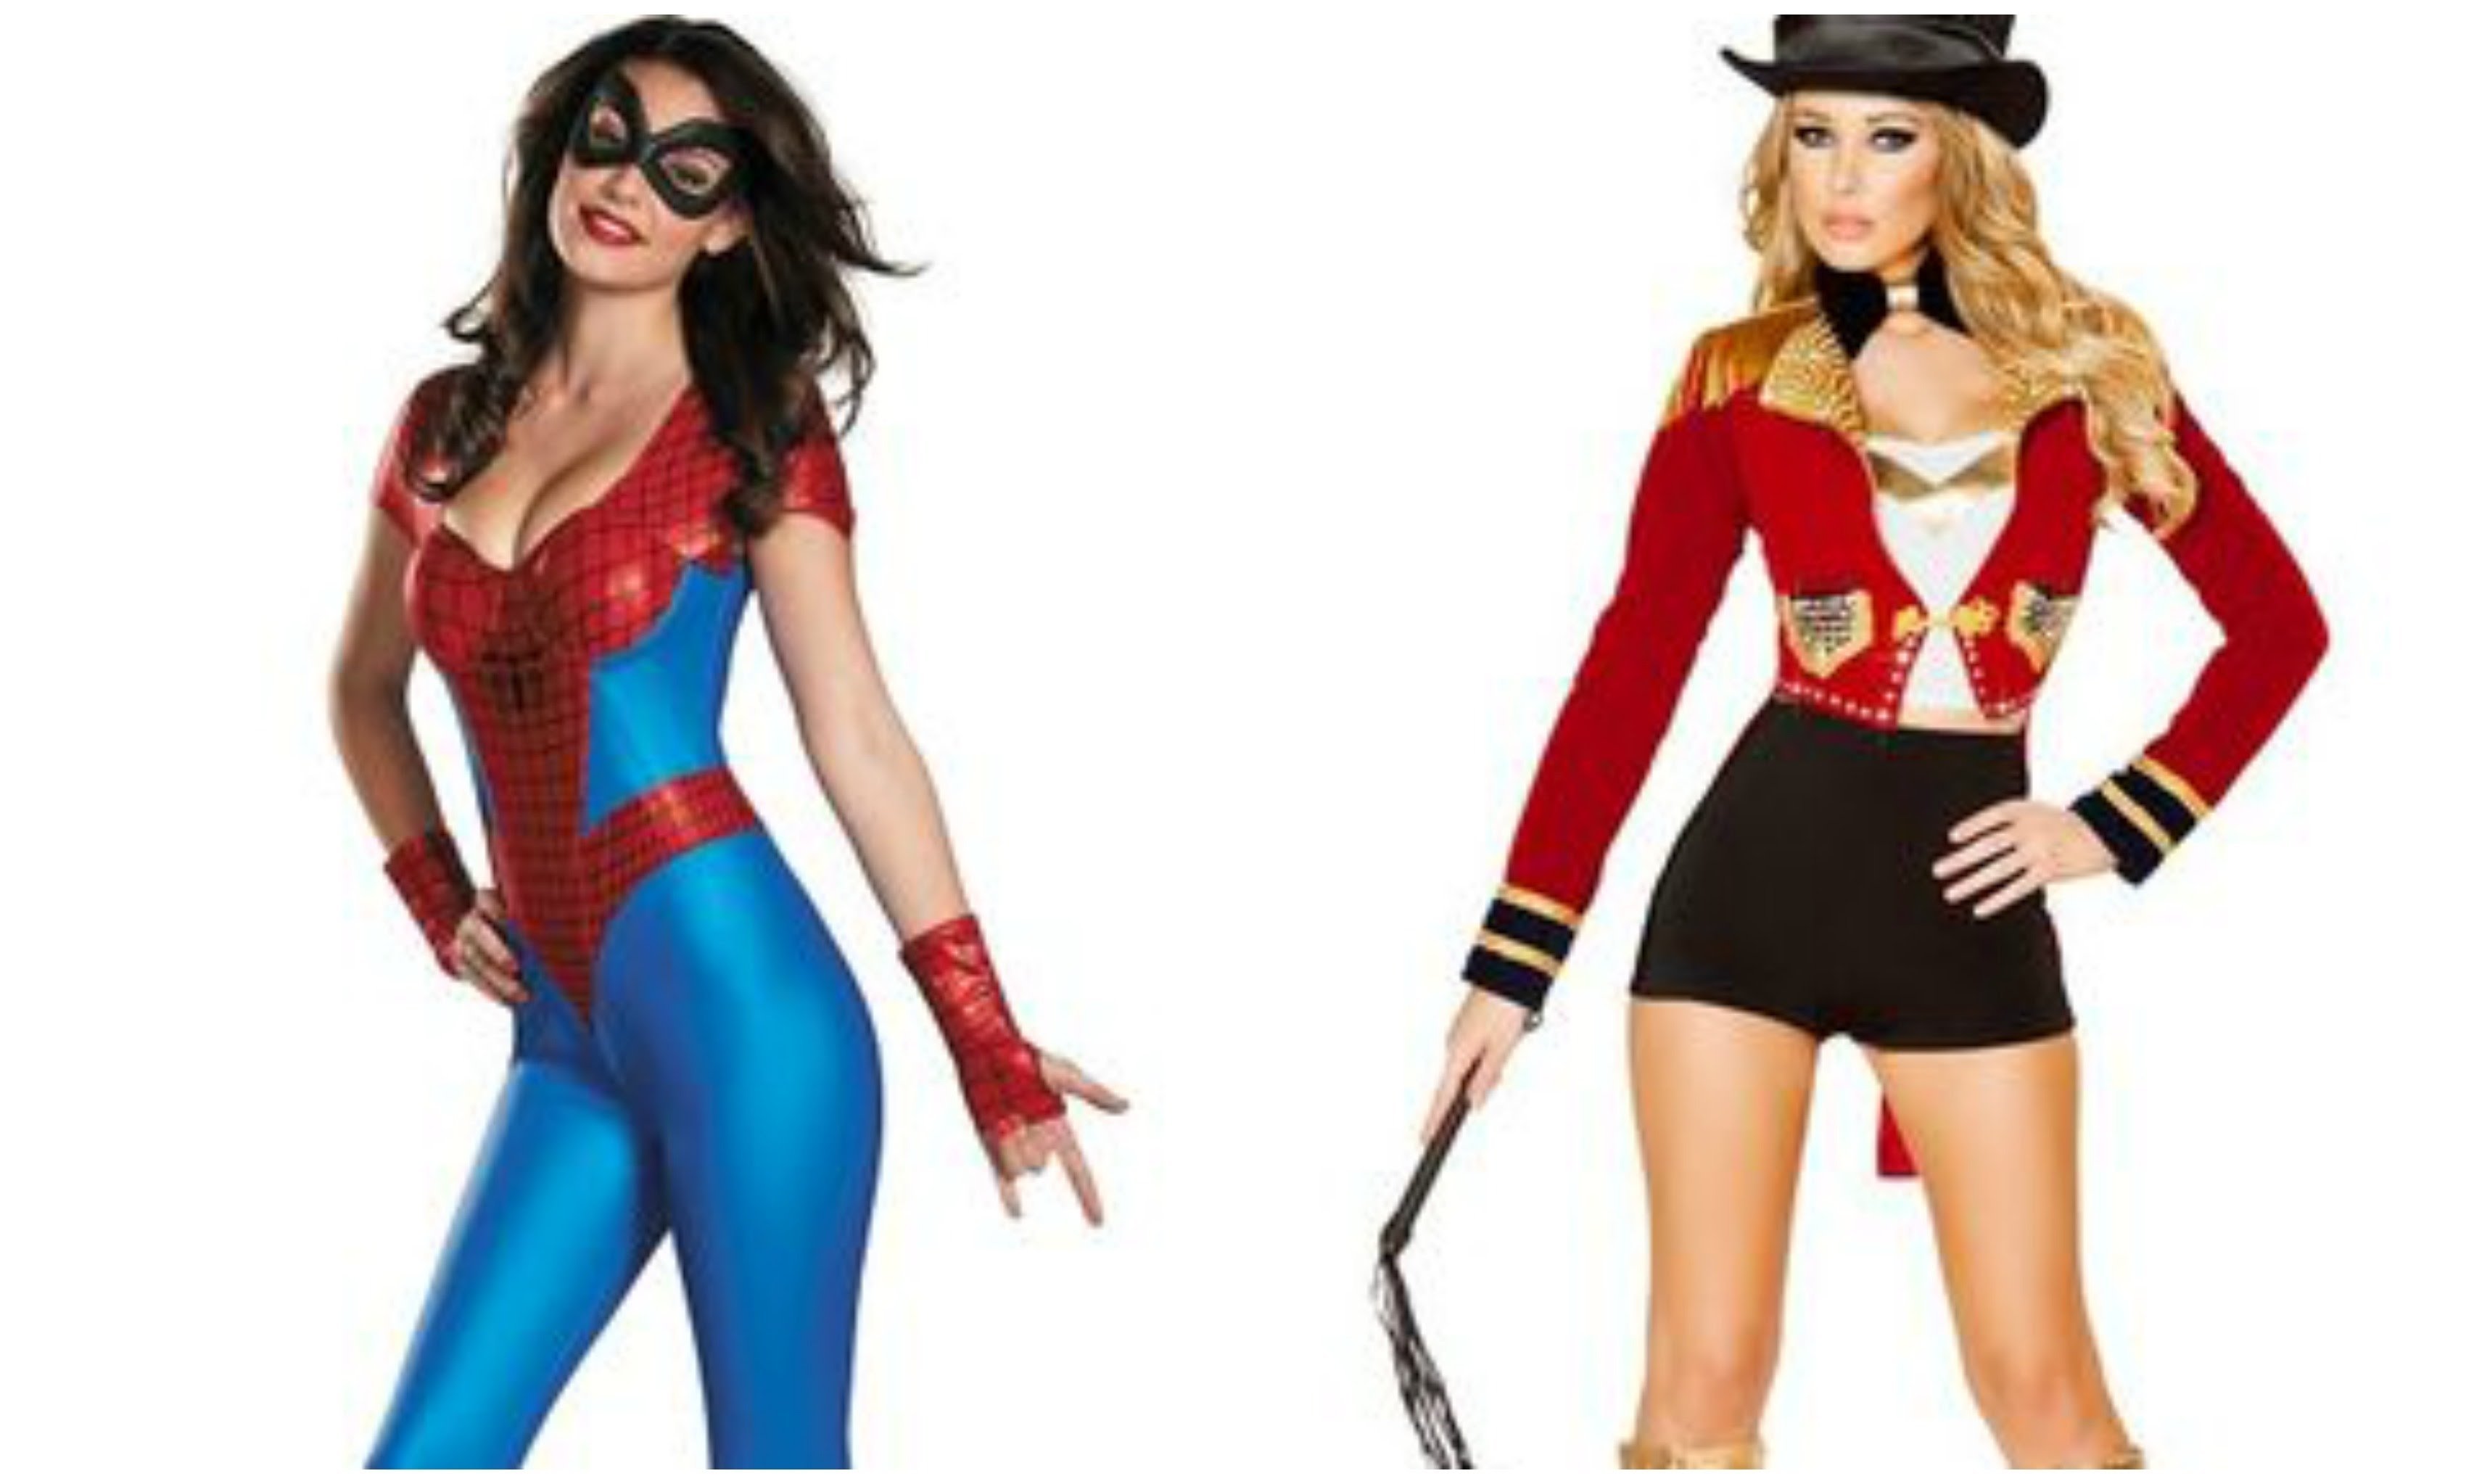 10 Lovely Sexy Costume Ideas For Women sexy halloween costumes ideas for women lookbook youtube 8 2022